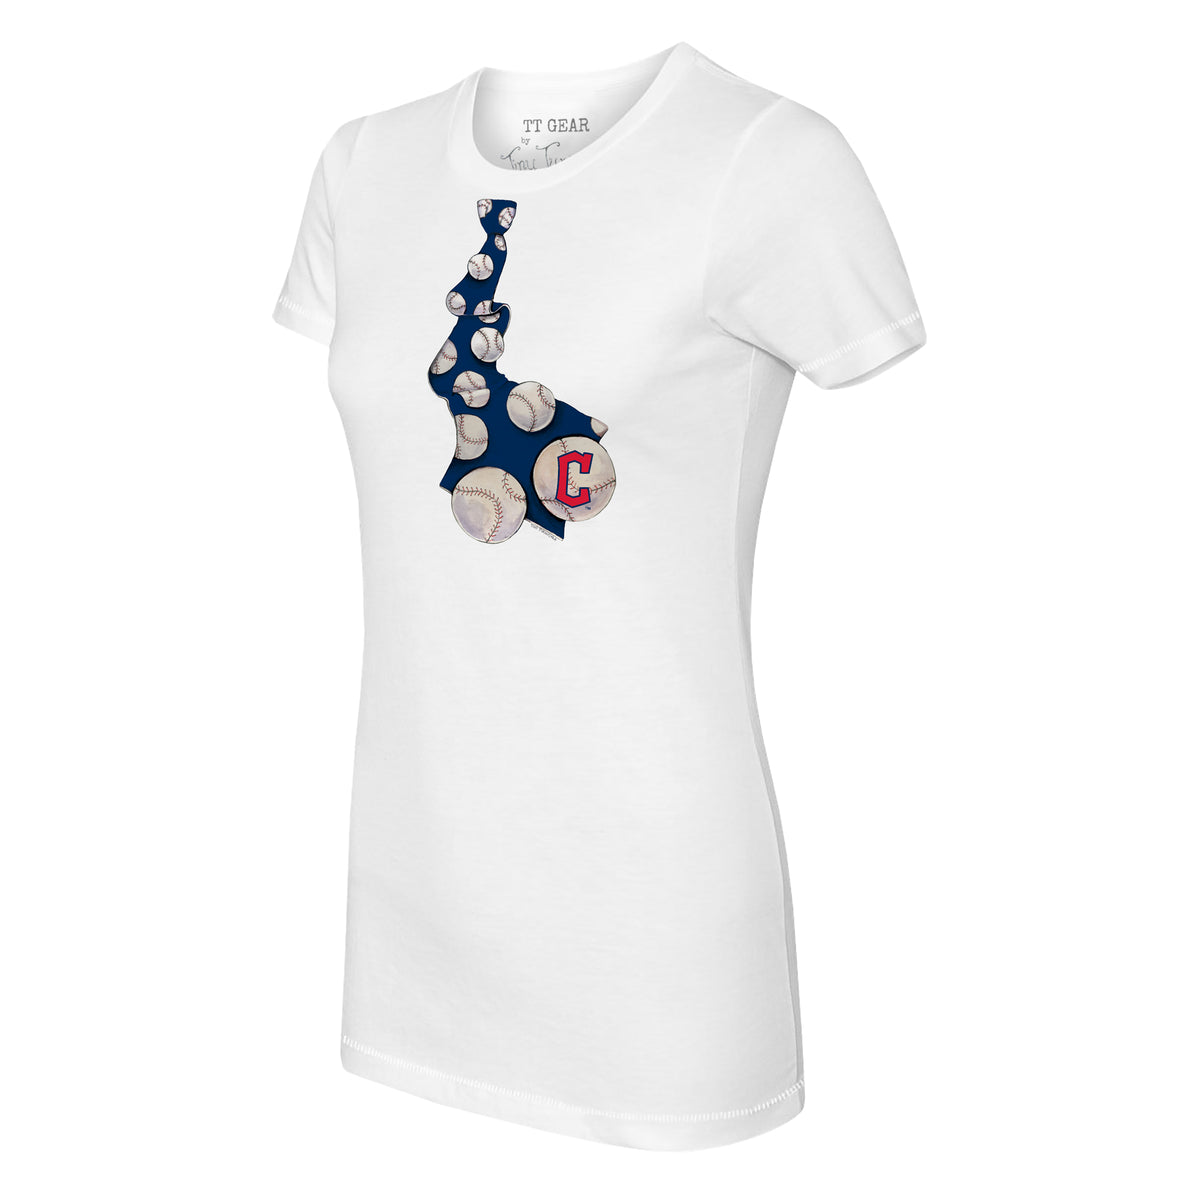 Cleveland Guardians Kate The Catcher Tee Shirt Women's XS / White